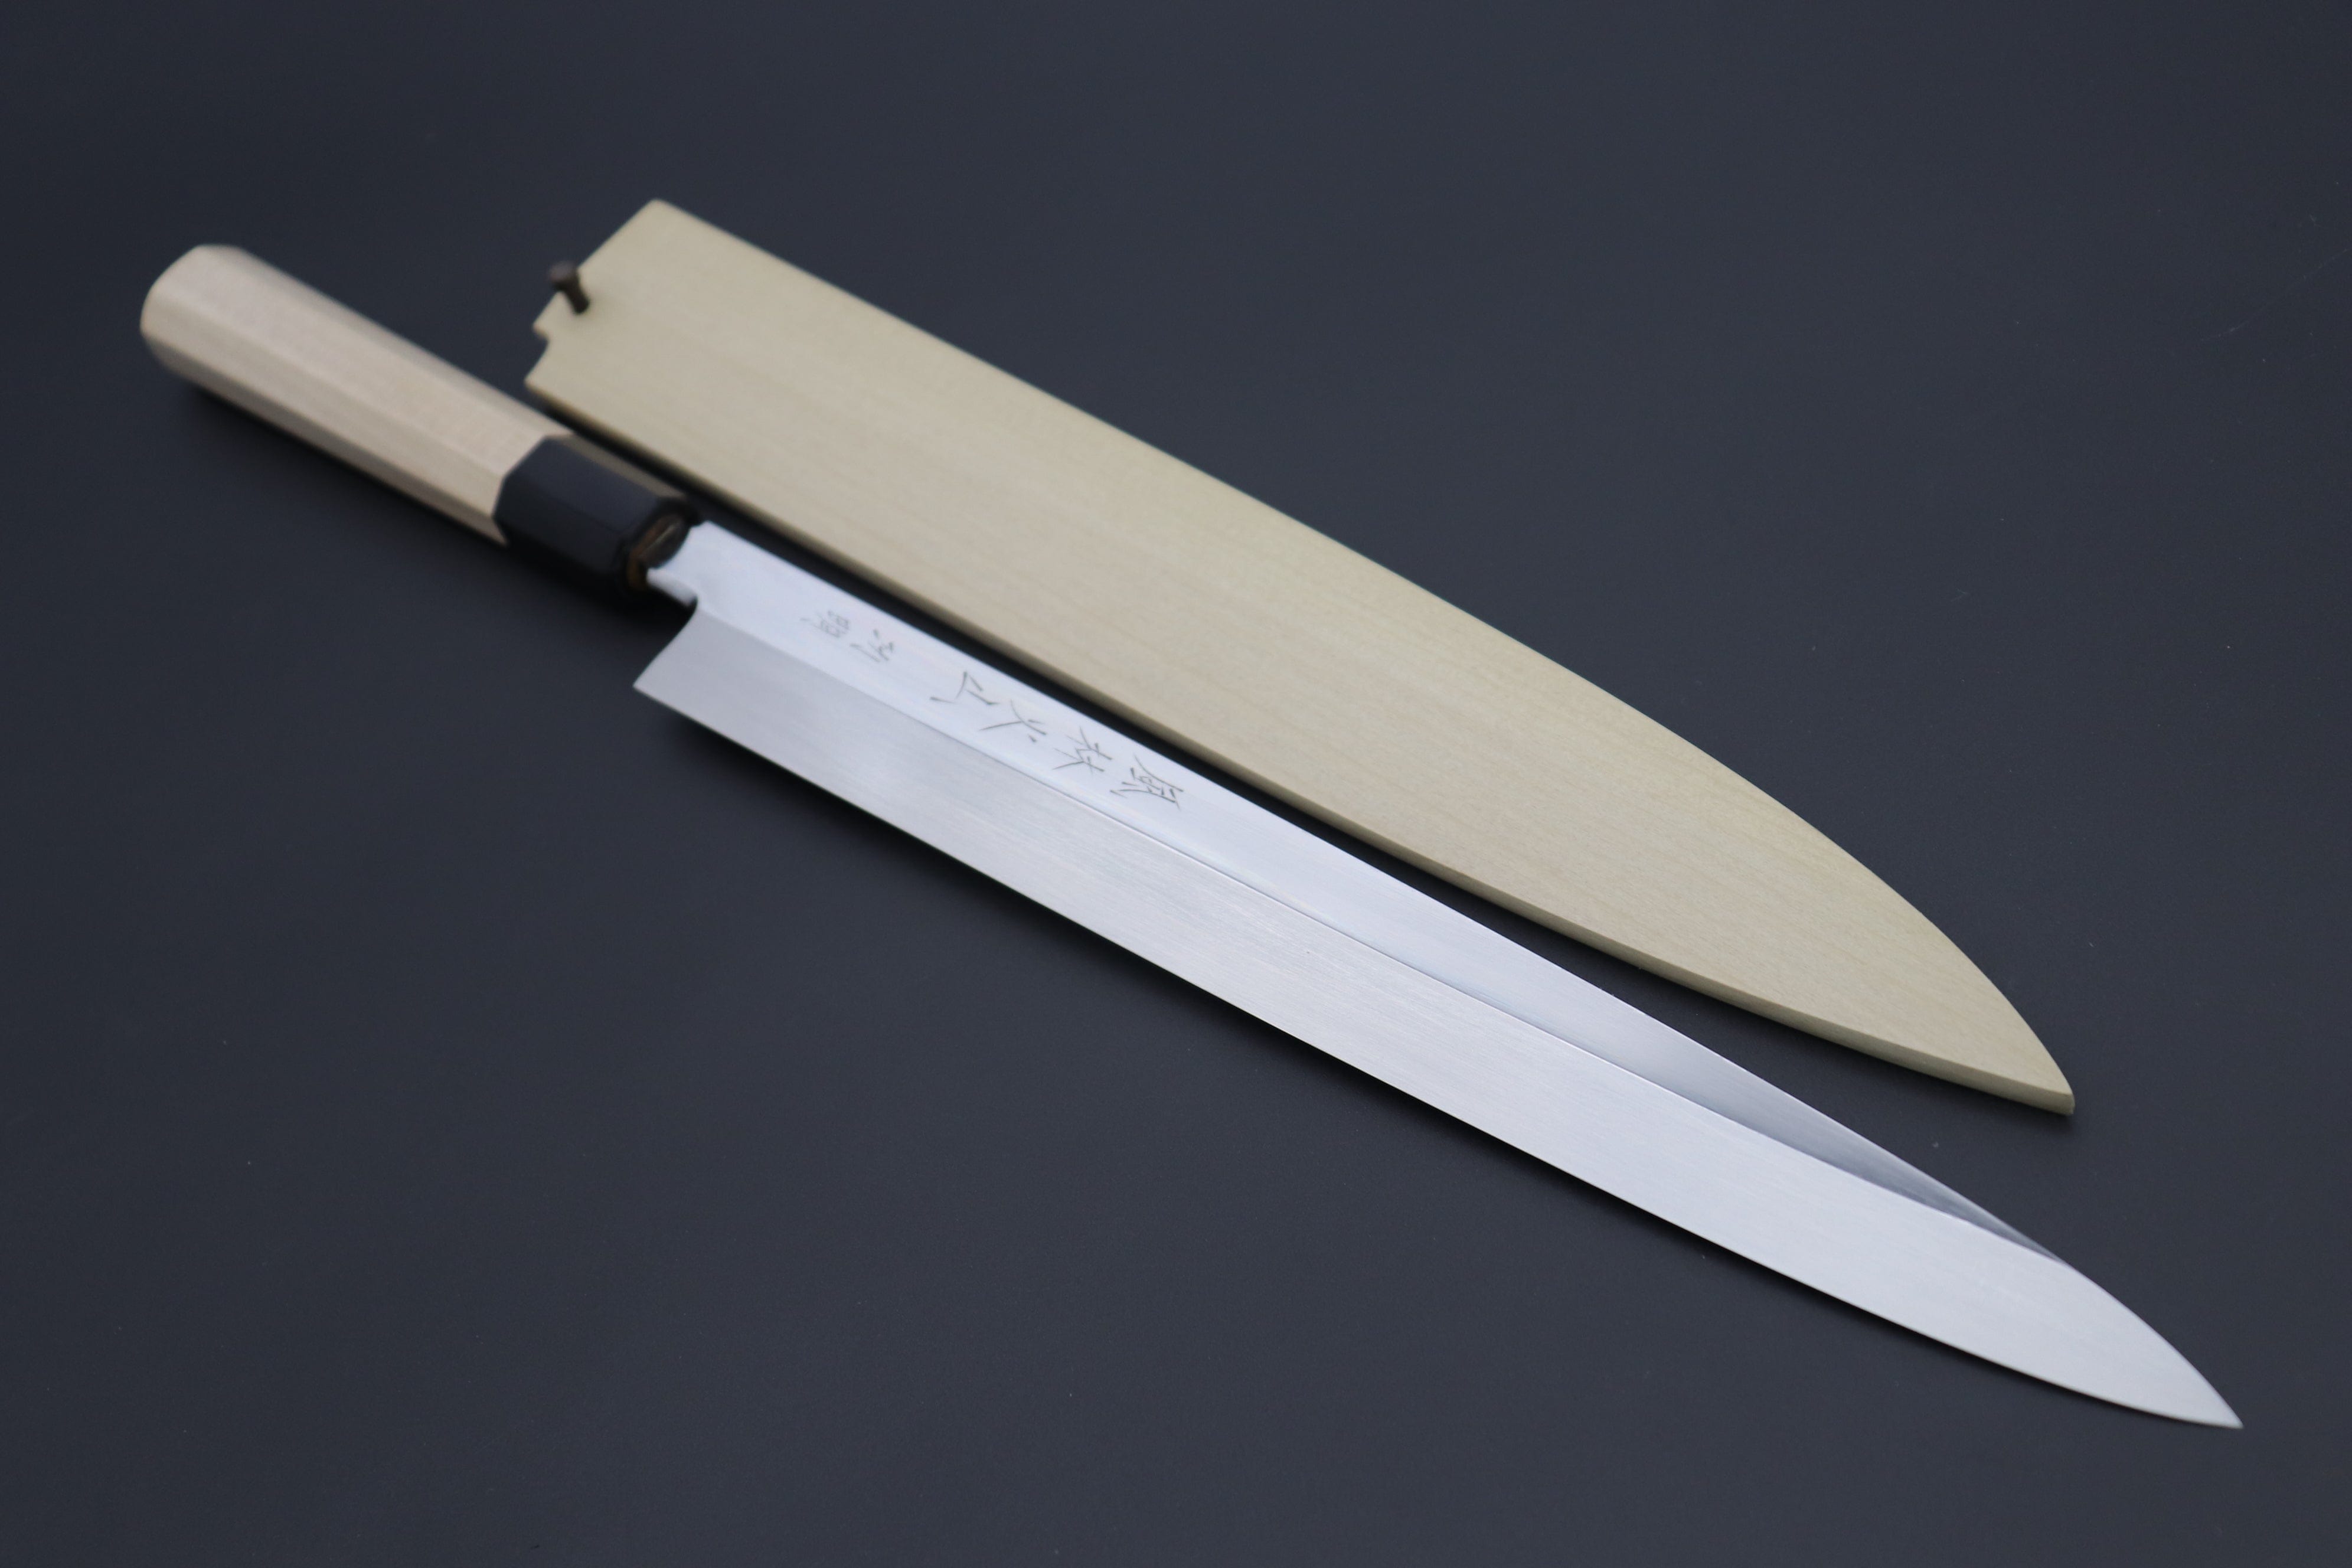 So, which sashimi(sushi) knife is the best?